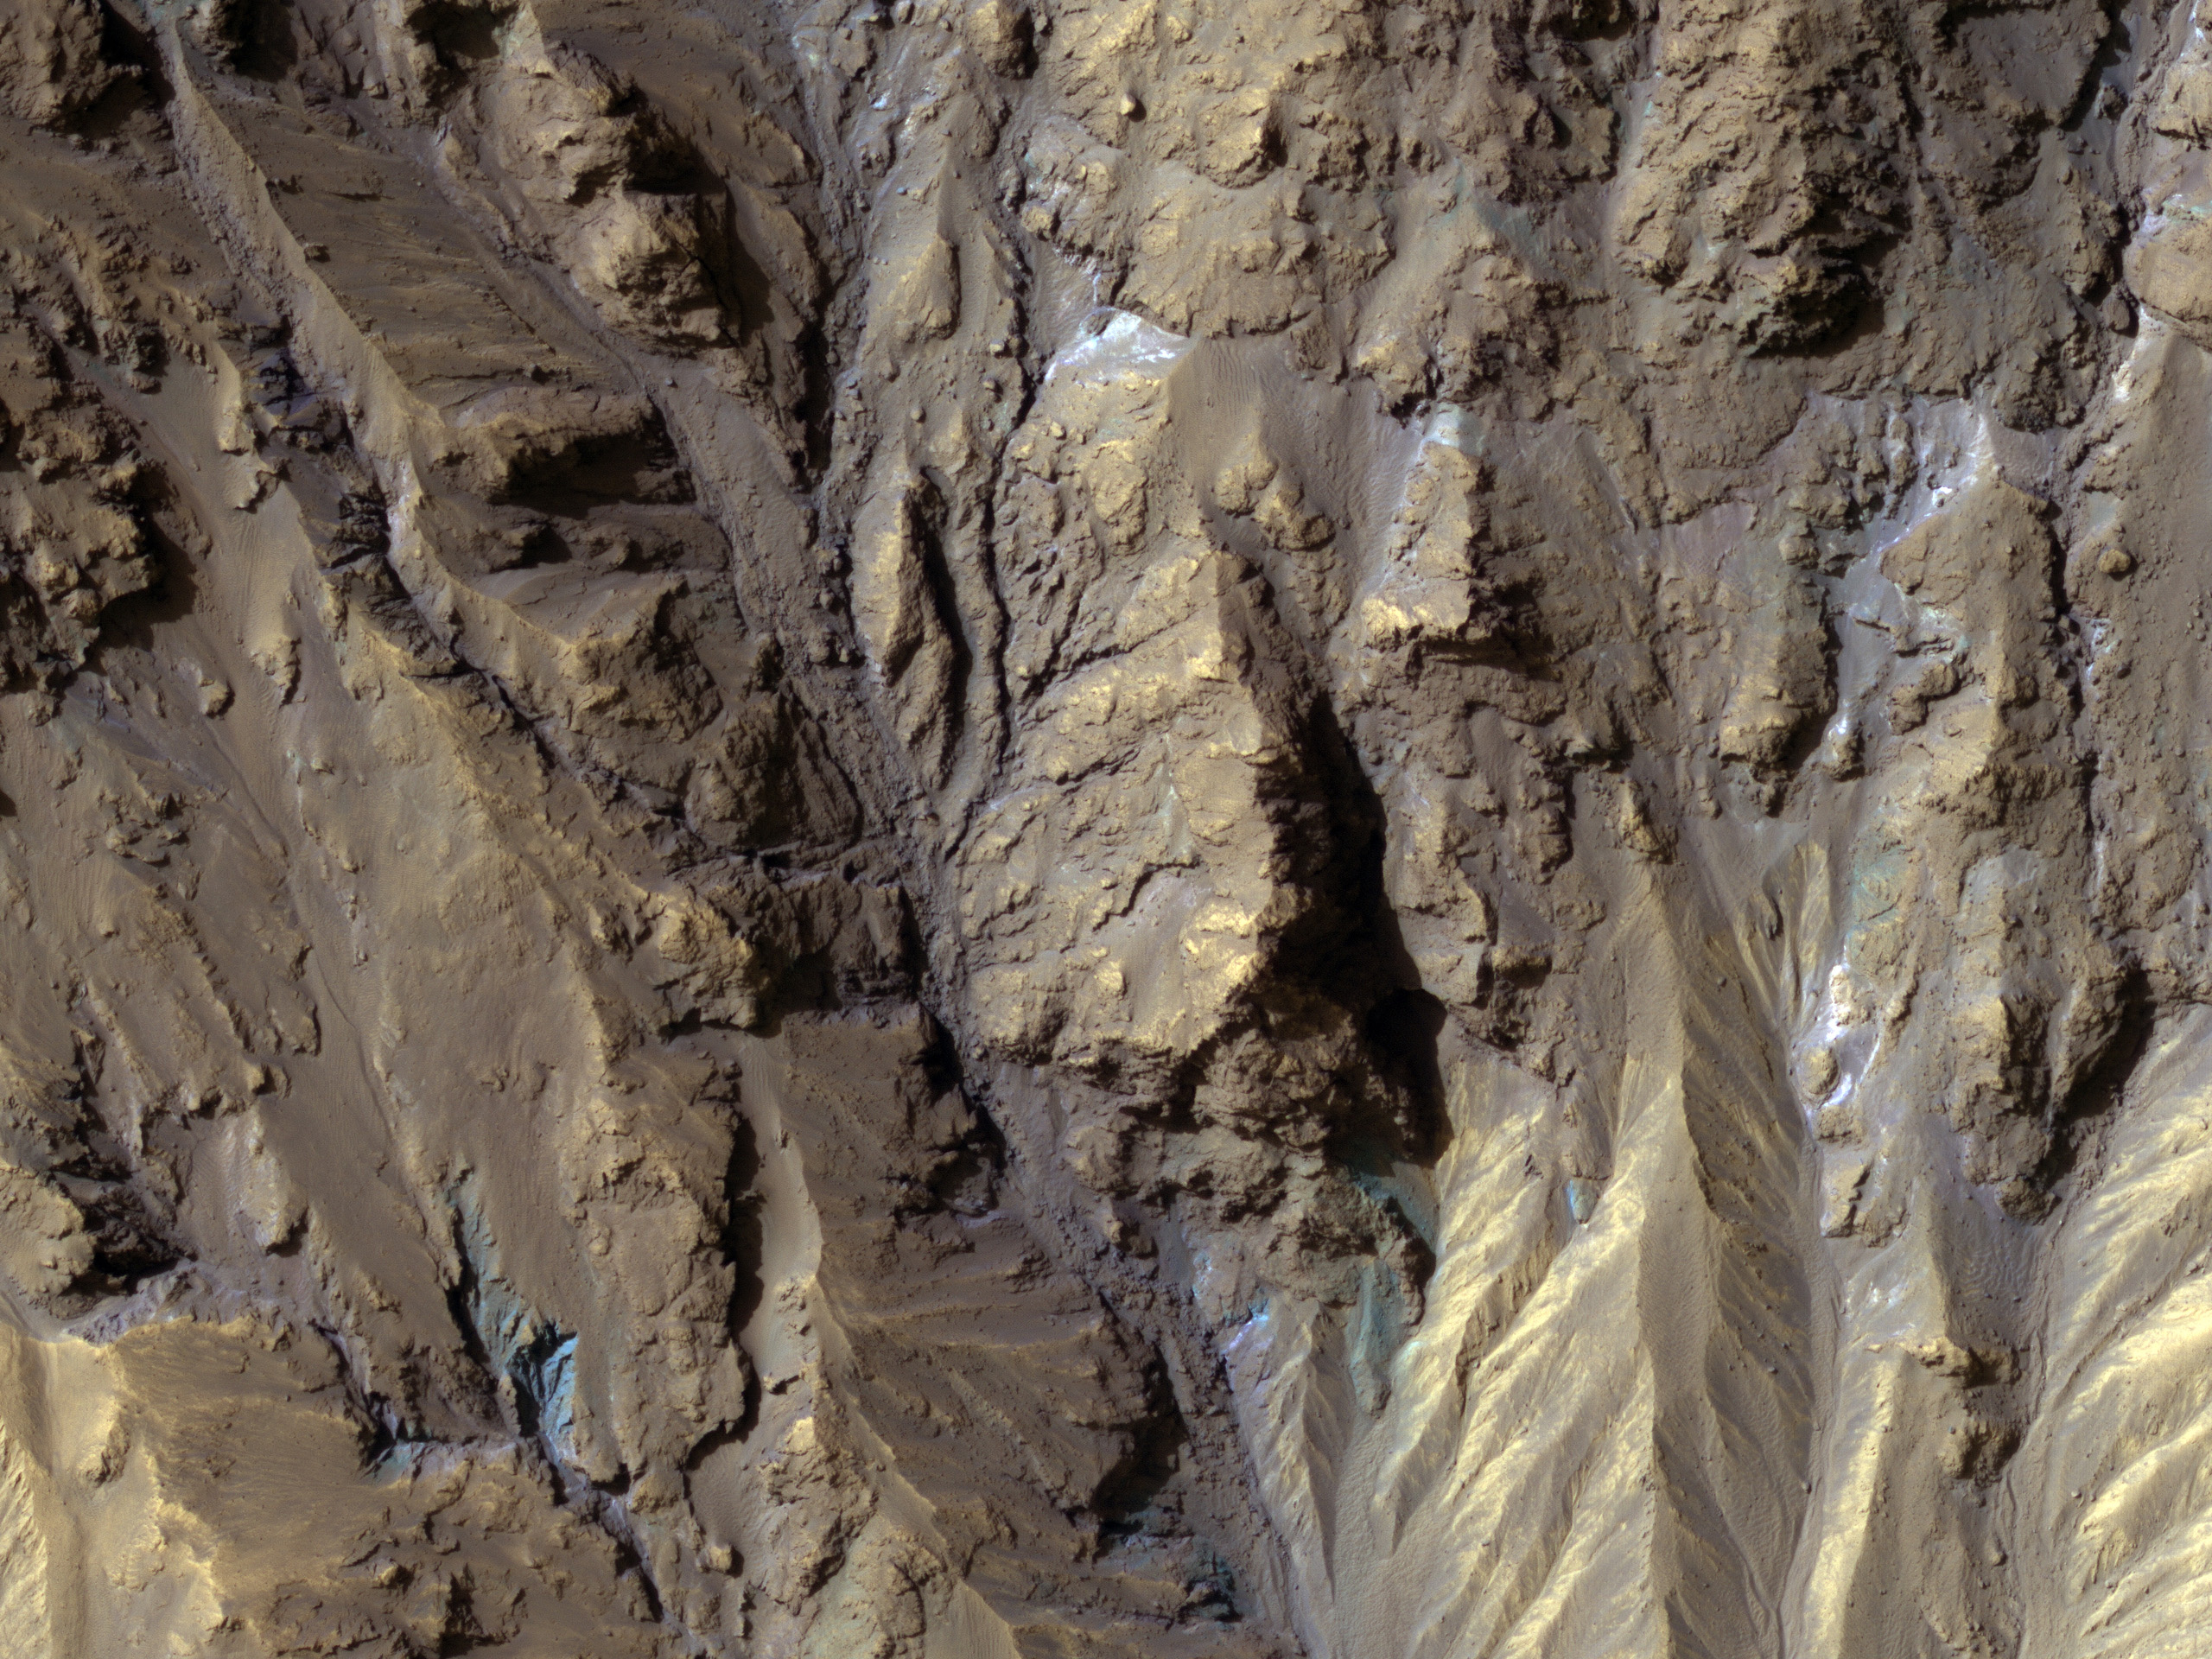 Sources of Gullies in Hale Crater